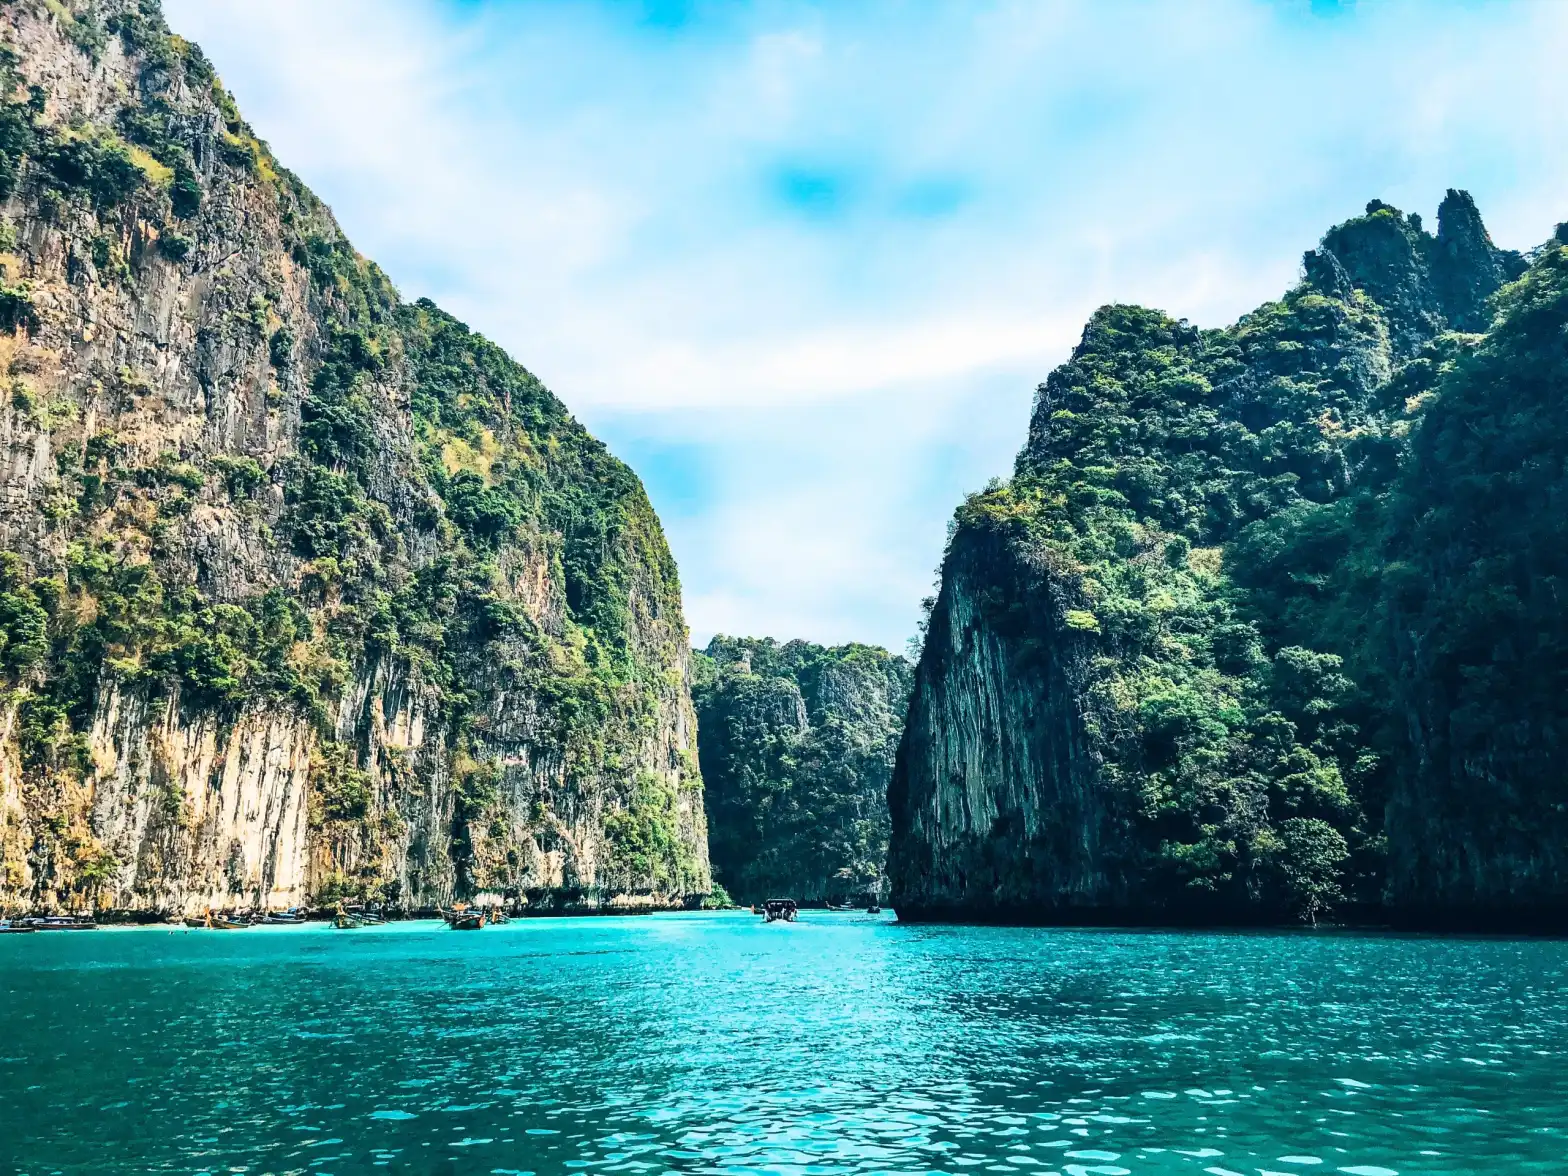 Picture of the Phi Phi Islands from a boat driving through the islands